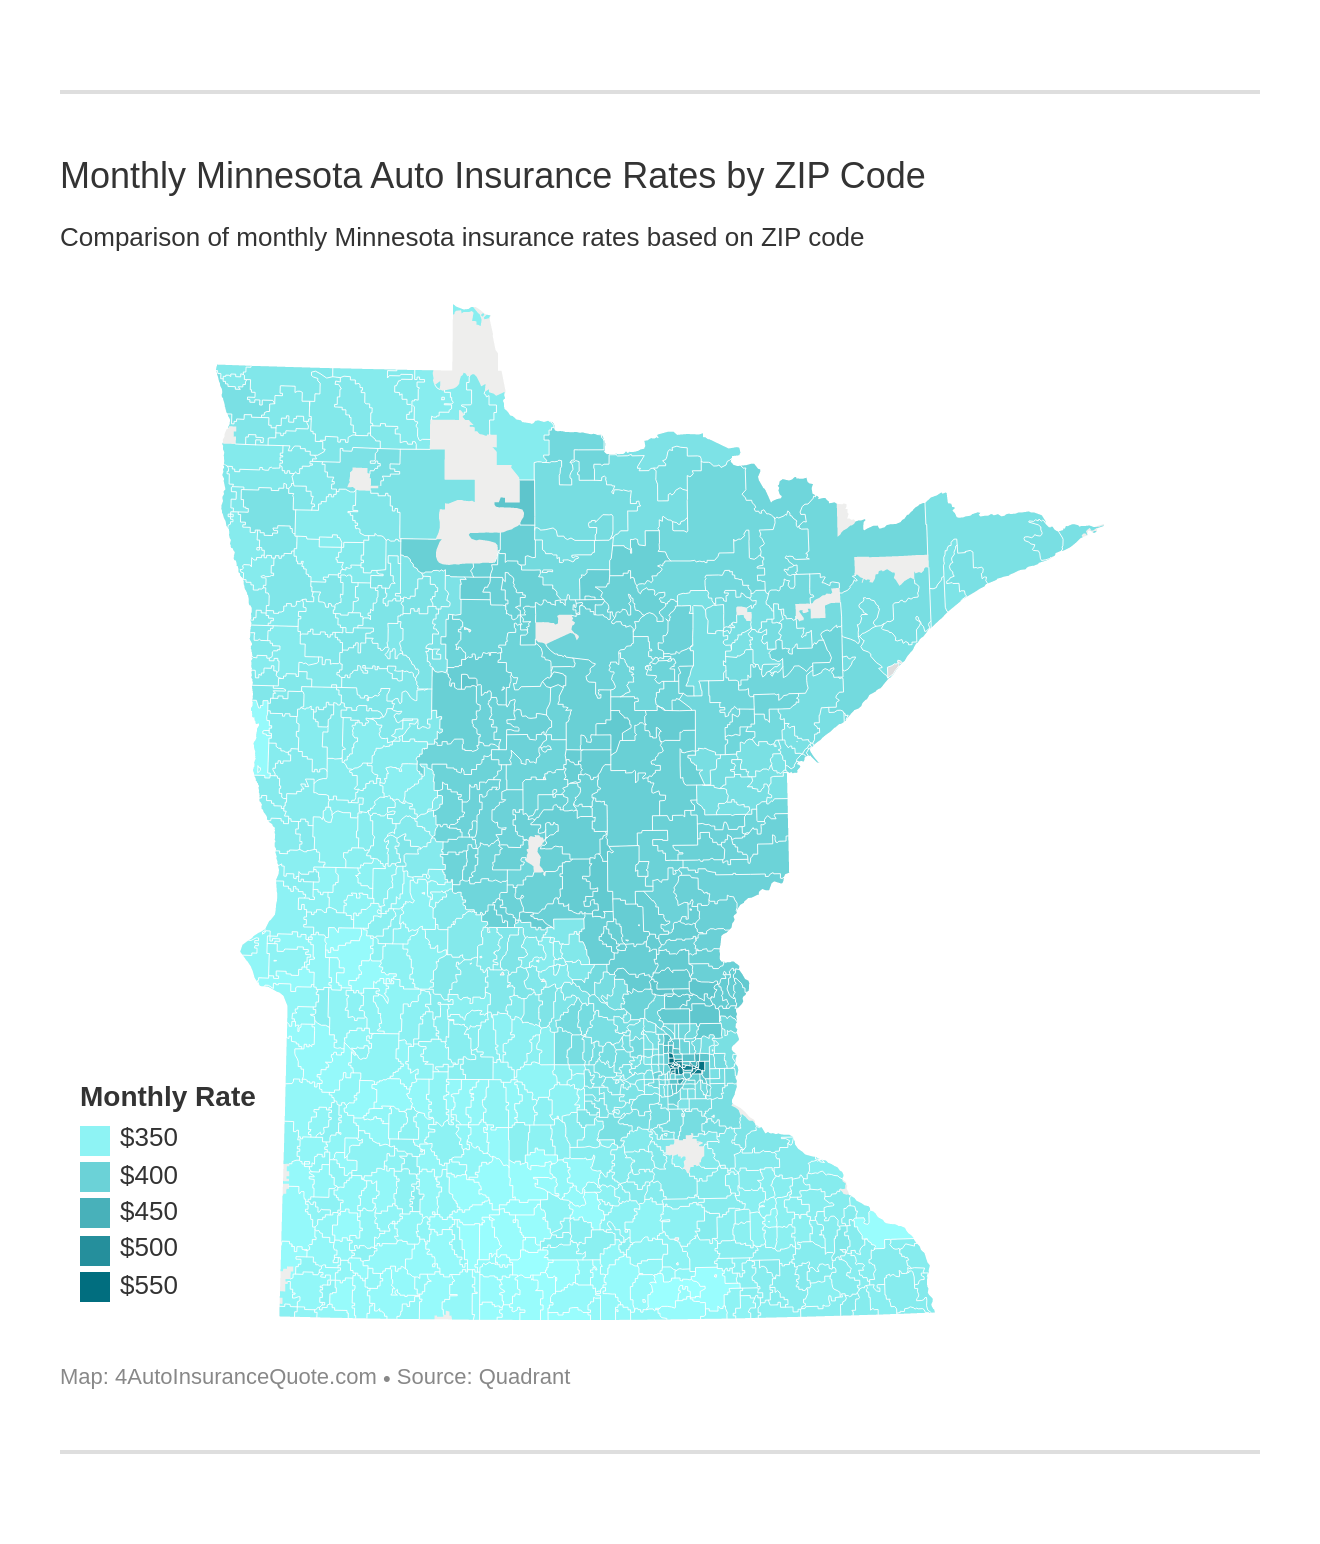 Monthly Minnesota Auto Insurance Rates by ZIP Code